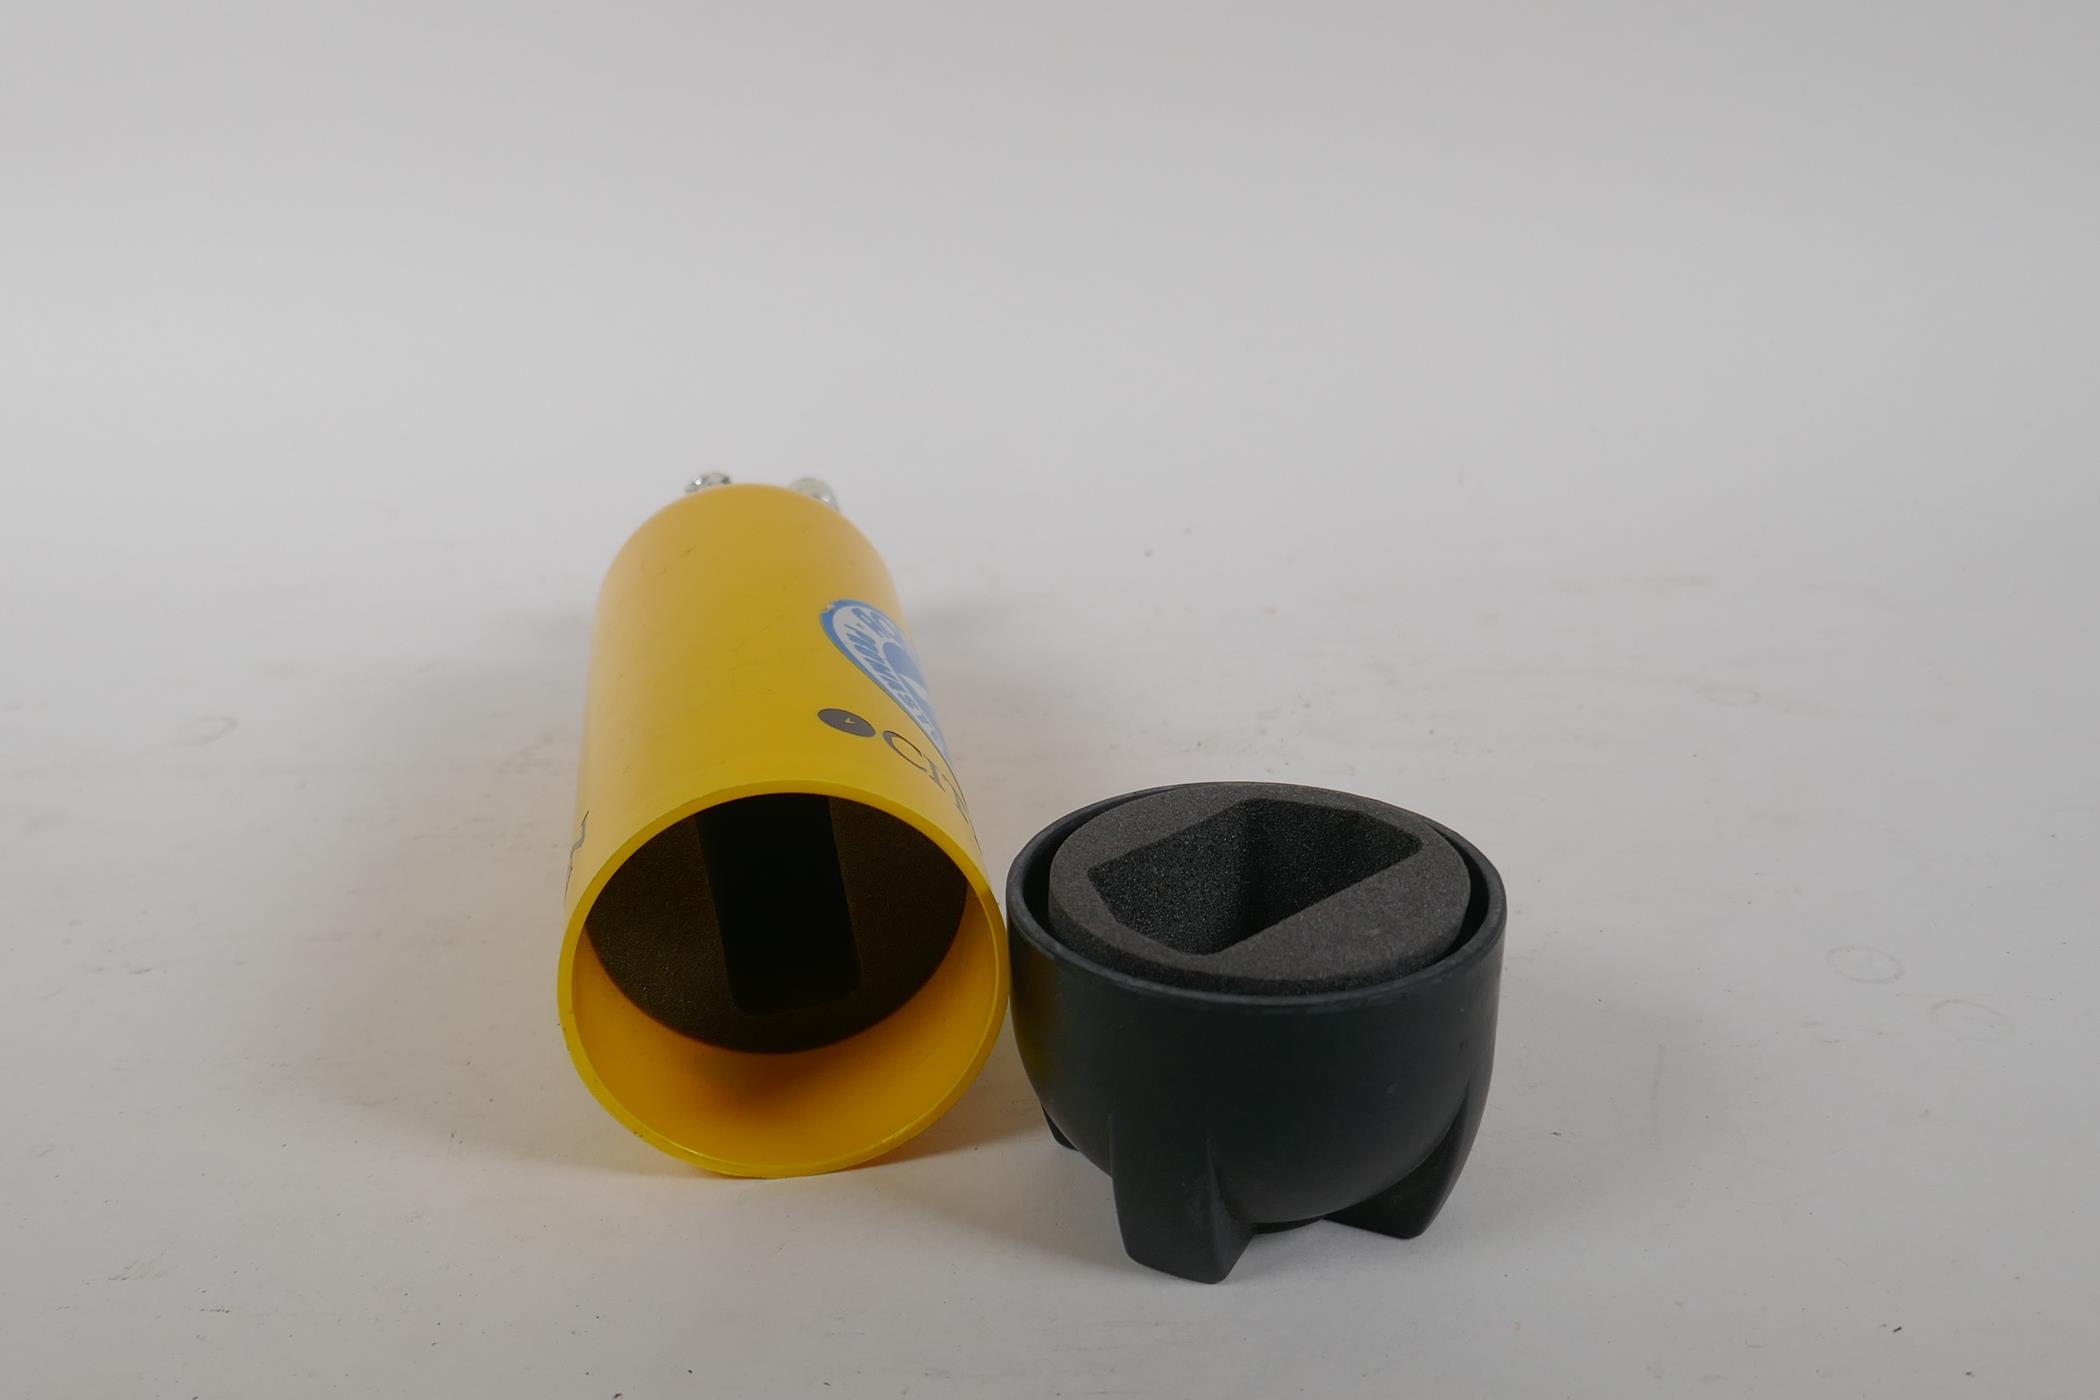 A Citizen Promaster Aqualand watch case in the form of a scuba air tank, 25cm high - Image 5 of 5